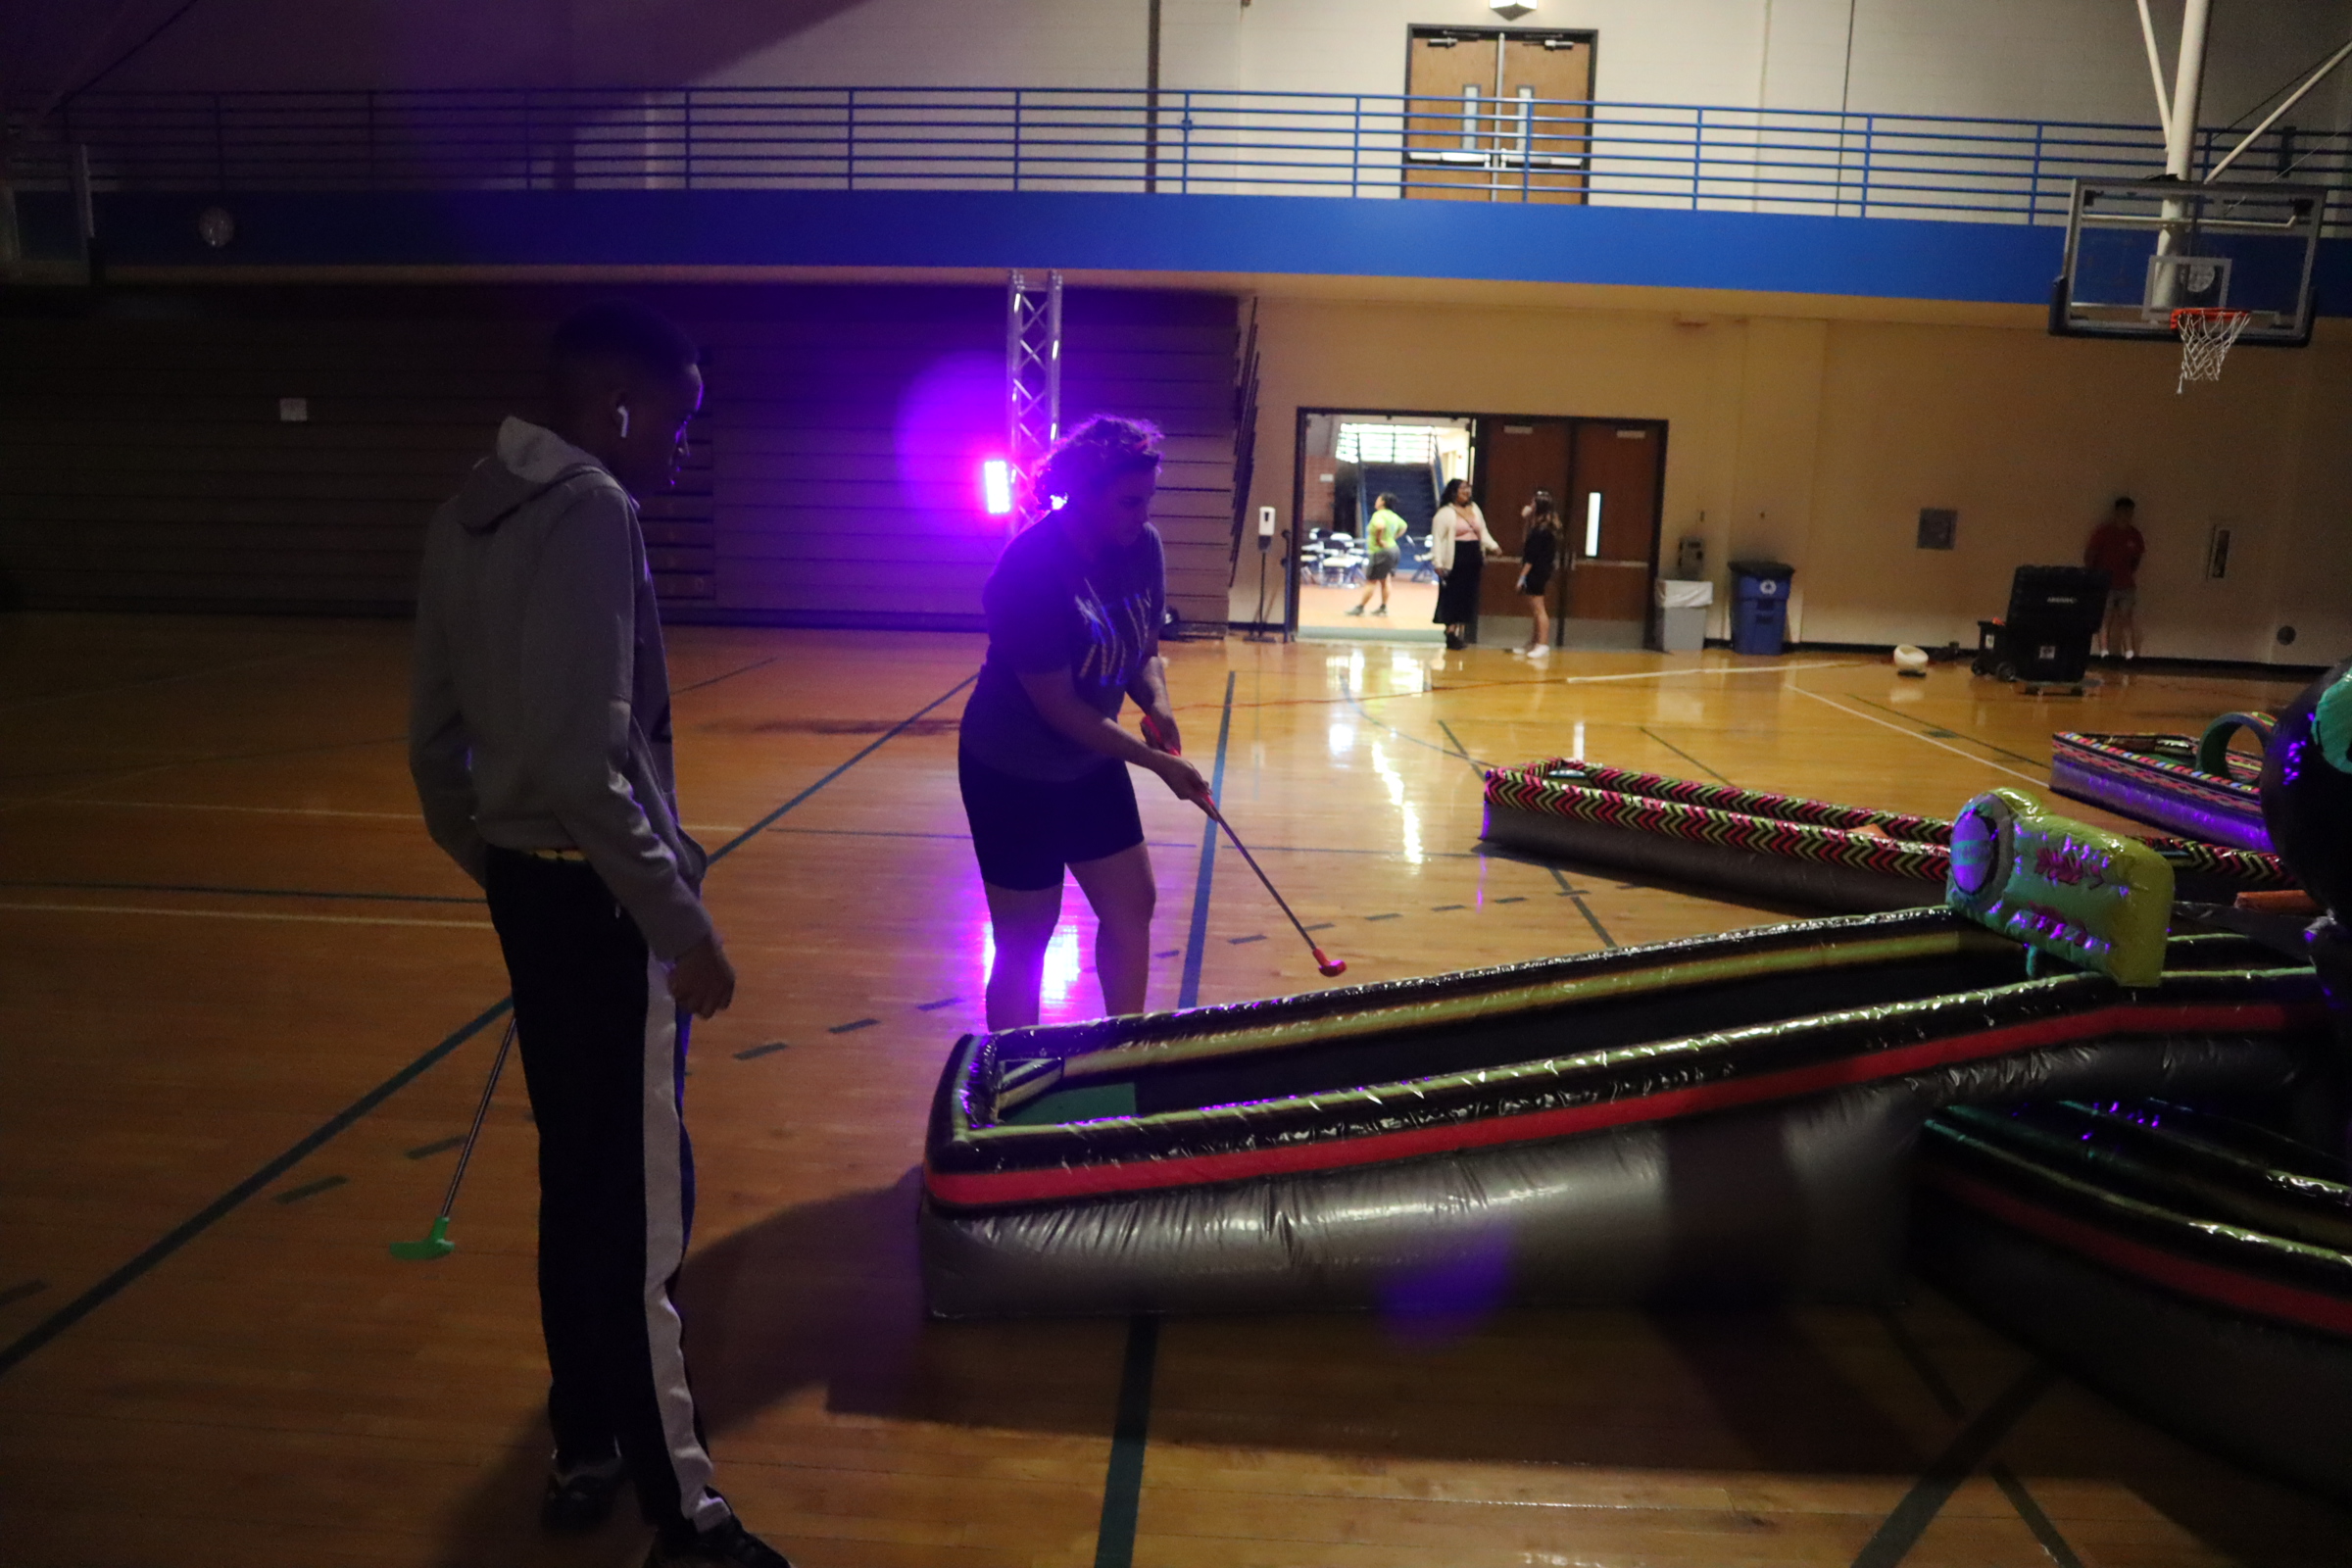 Students playing mini golf at an event